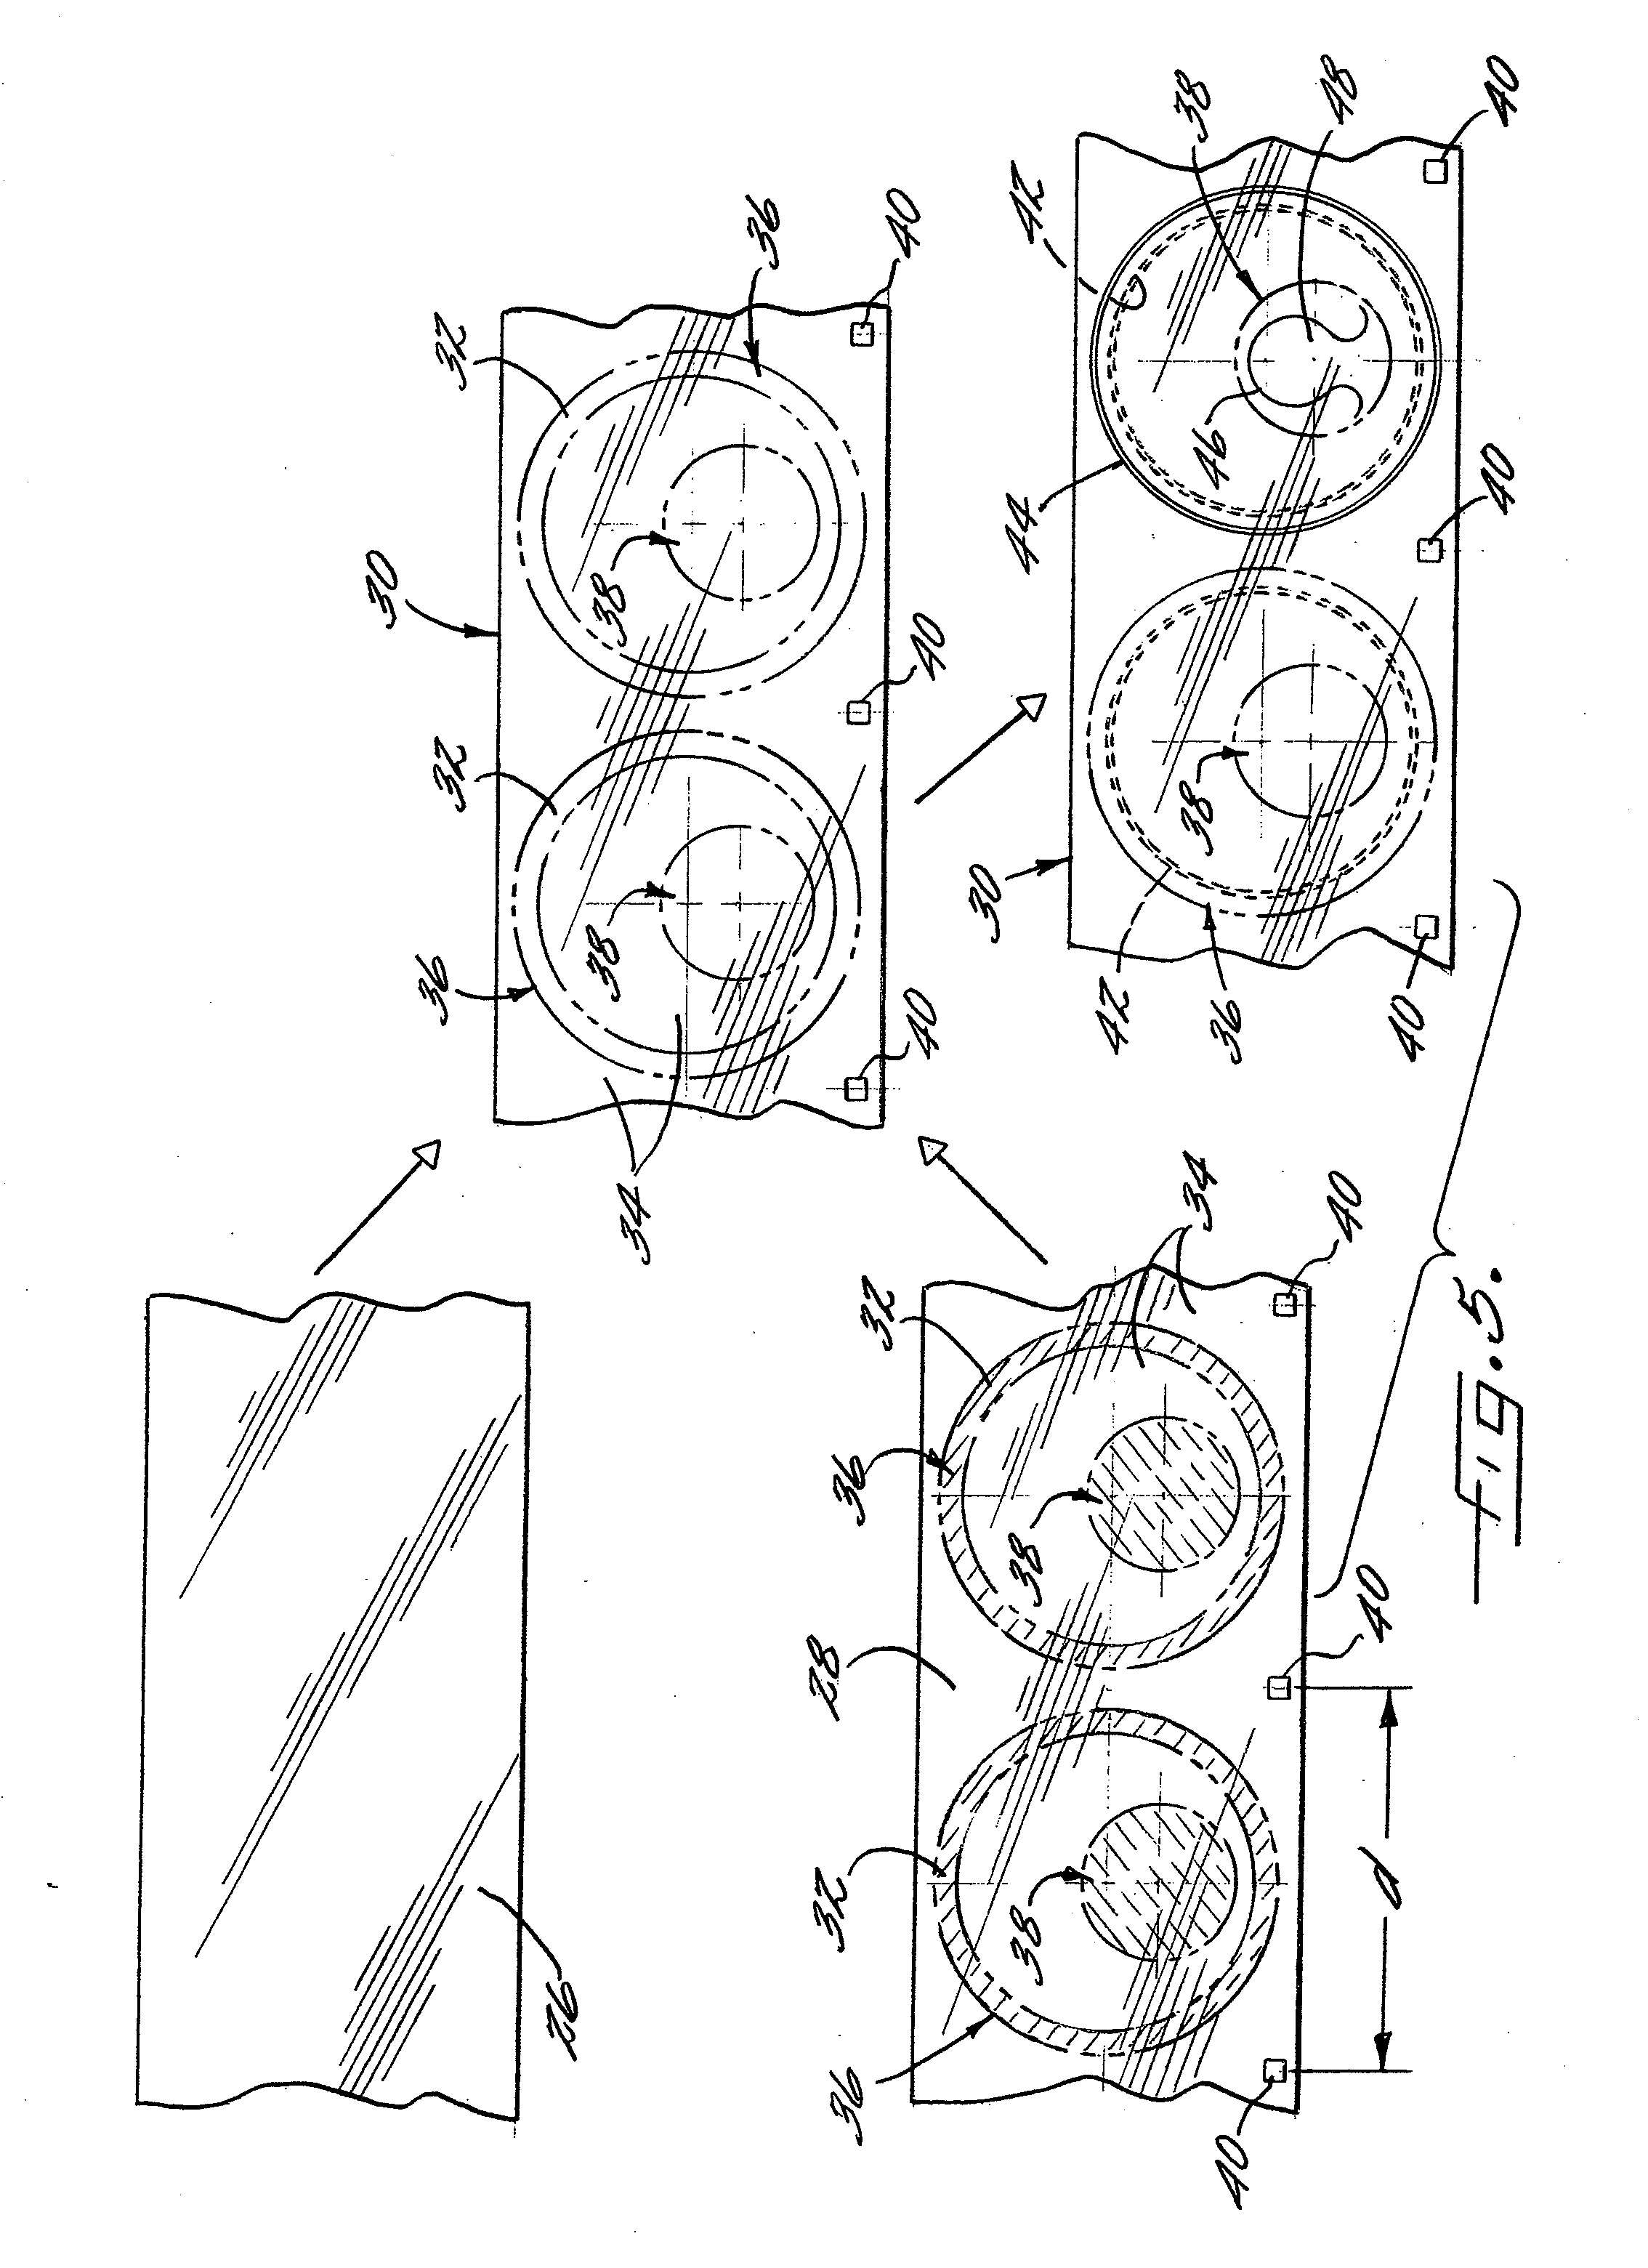 Method for Making  a Container Lid Formed as a Laminate Having a Built-In Opening Feature